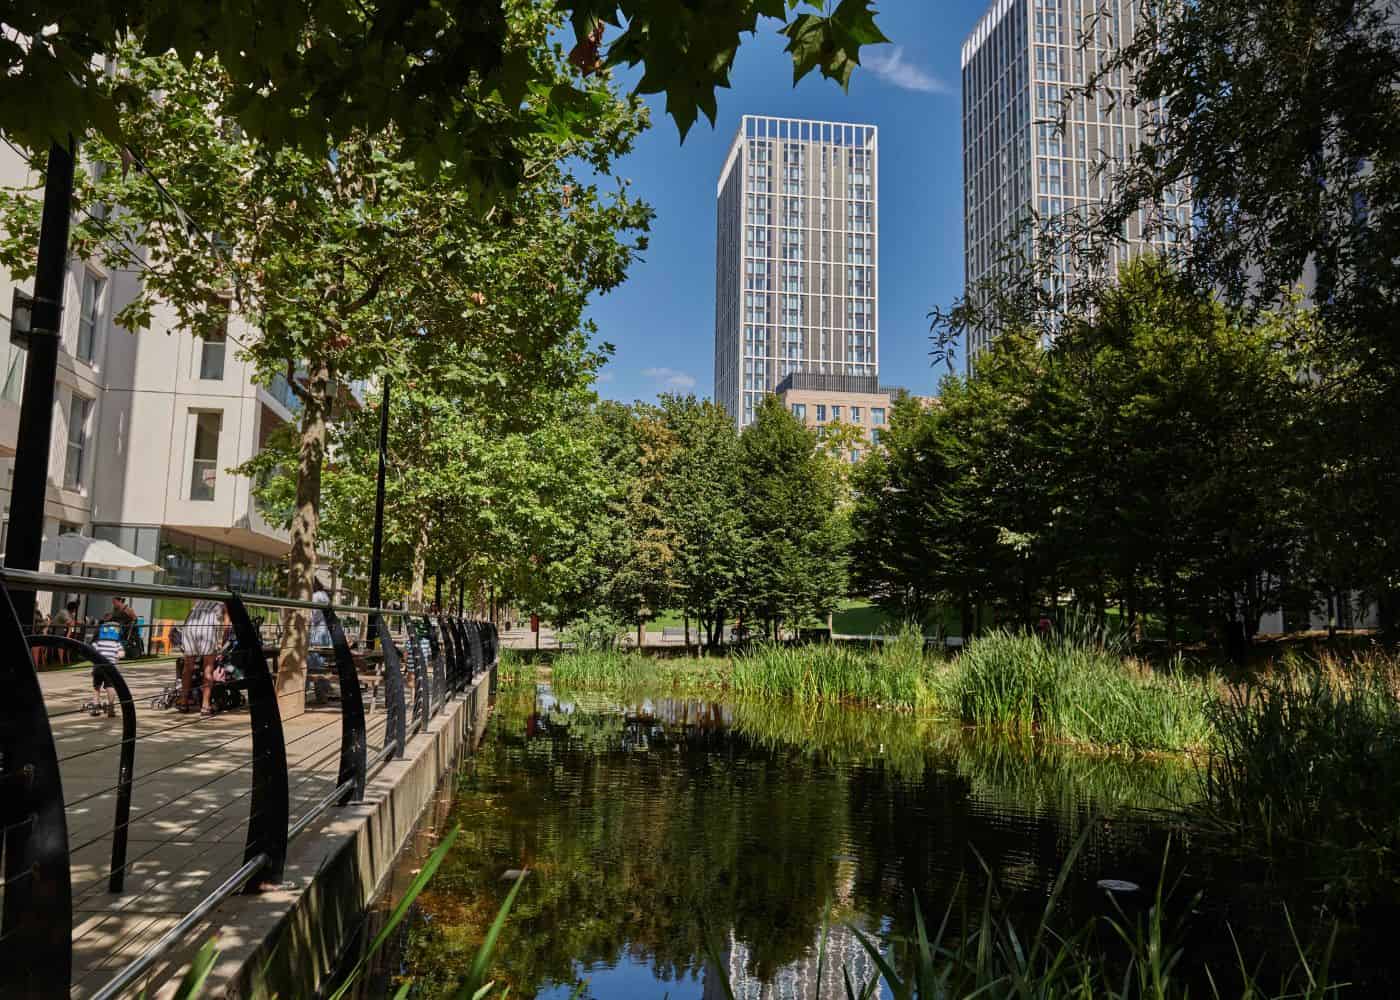 View of Victory Plaza buildings through the trees from the Portland pond in East Village